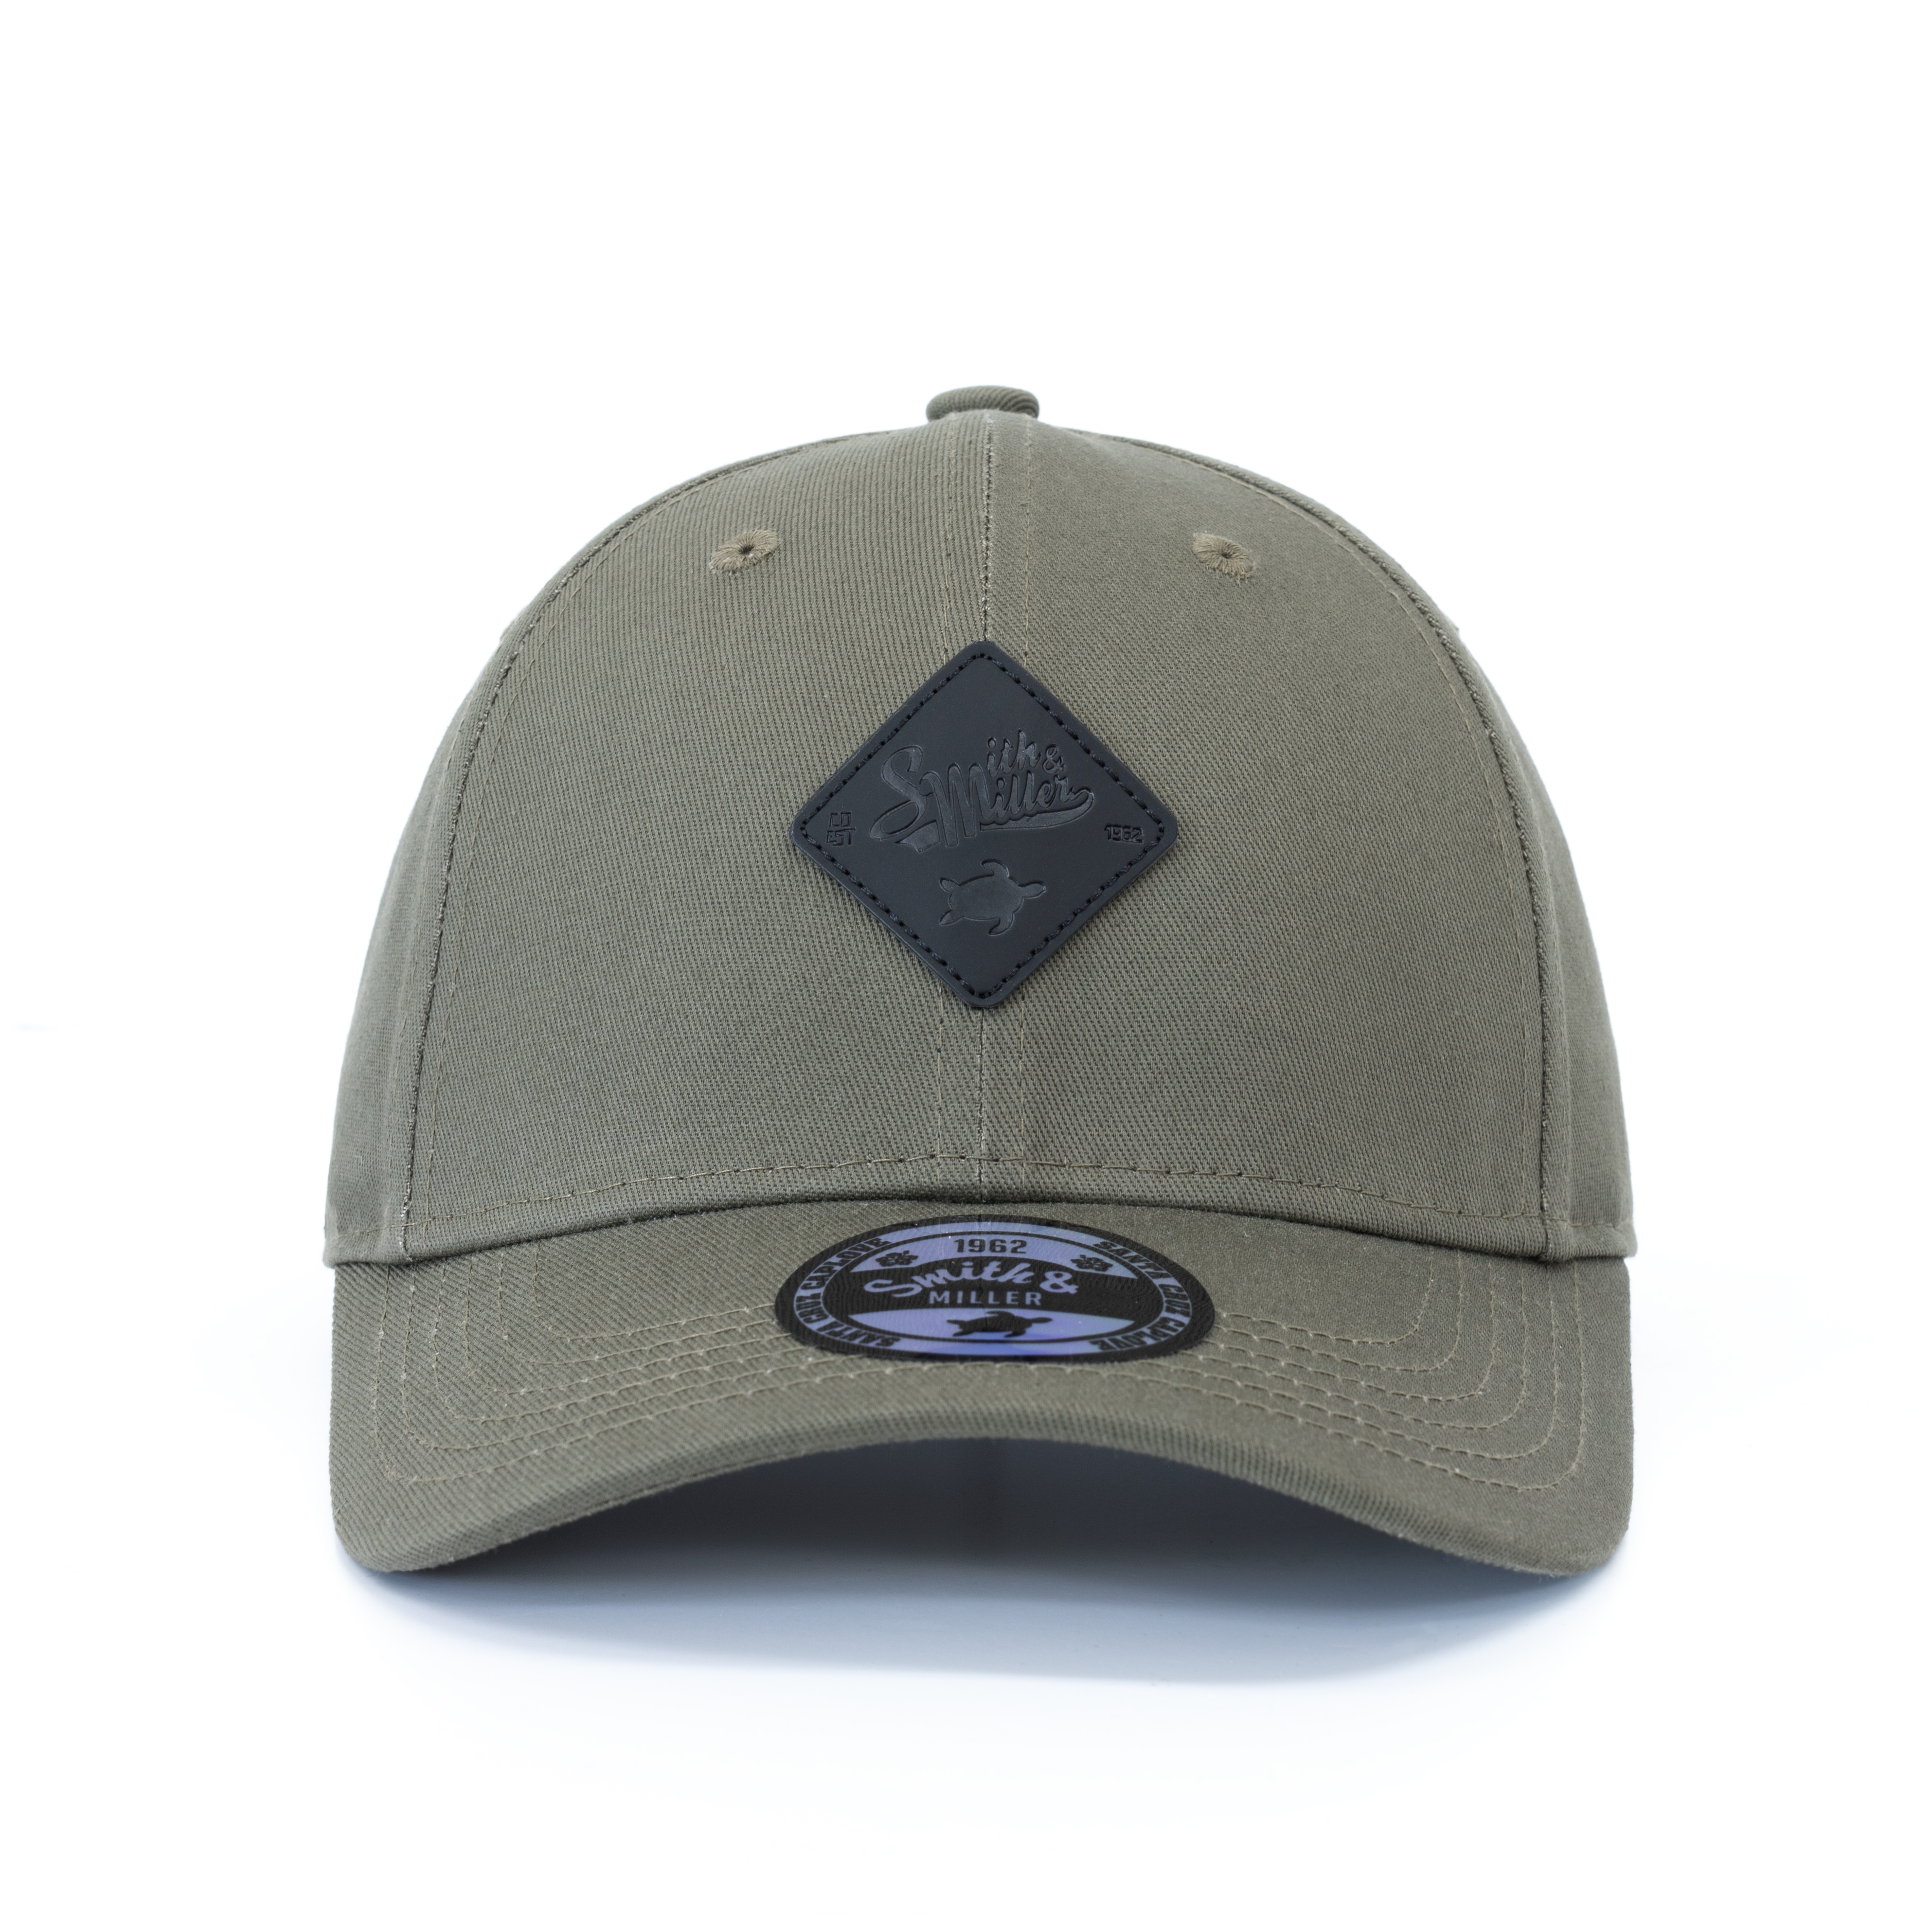 Smith & Miller Beverly Cap, olive